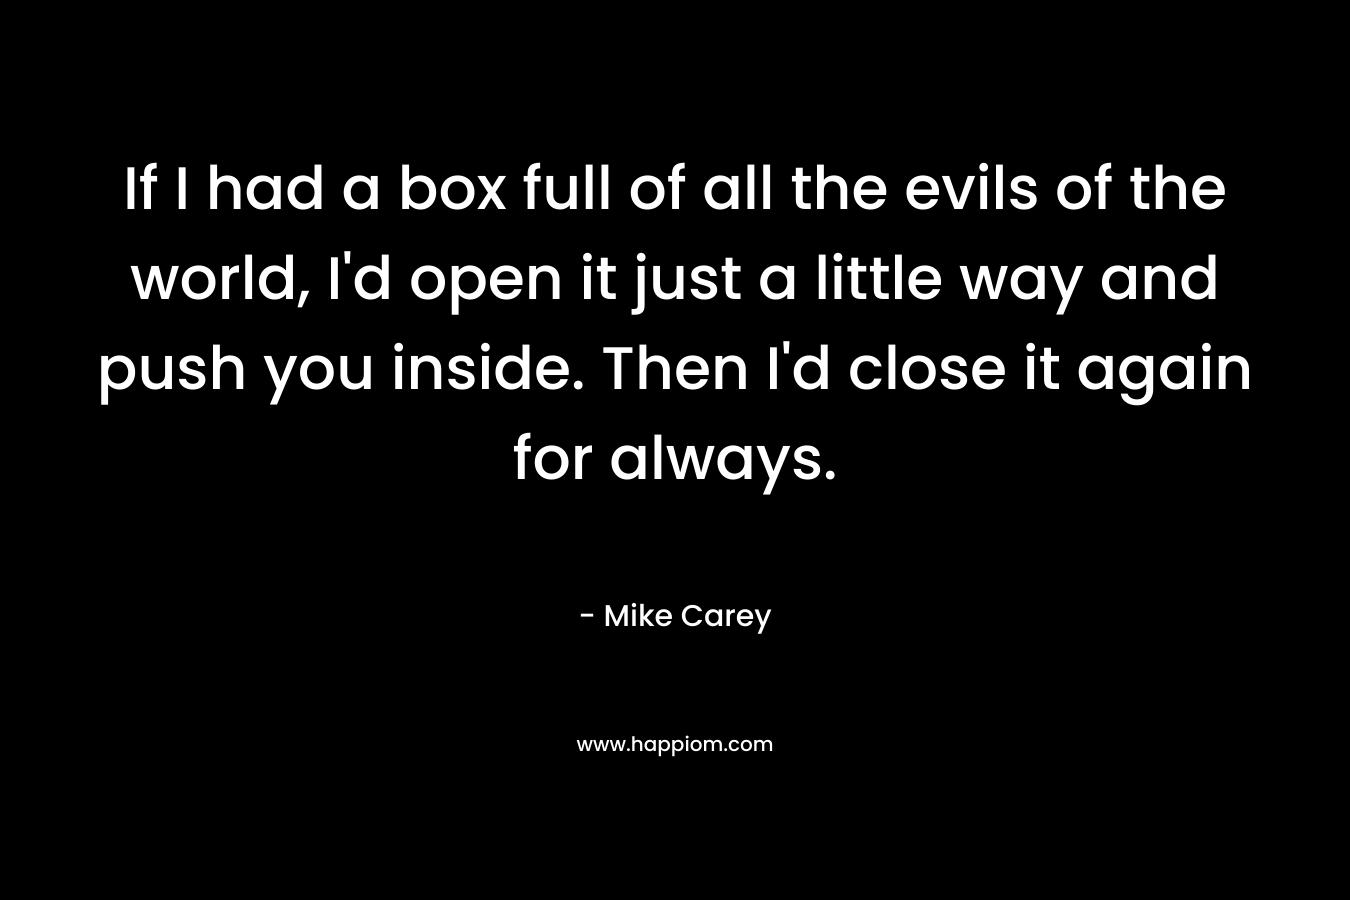 If I had a box full of all the evils of the world, I'd open it just a little way and push you inside. Then I'd close it again for always.